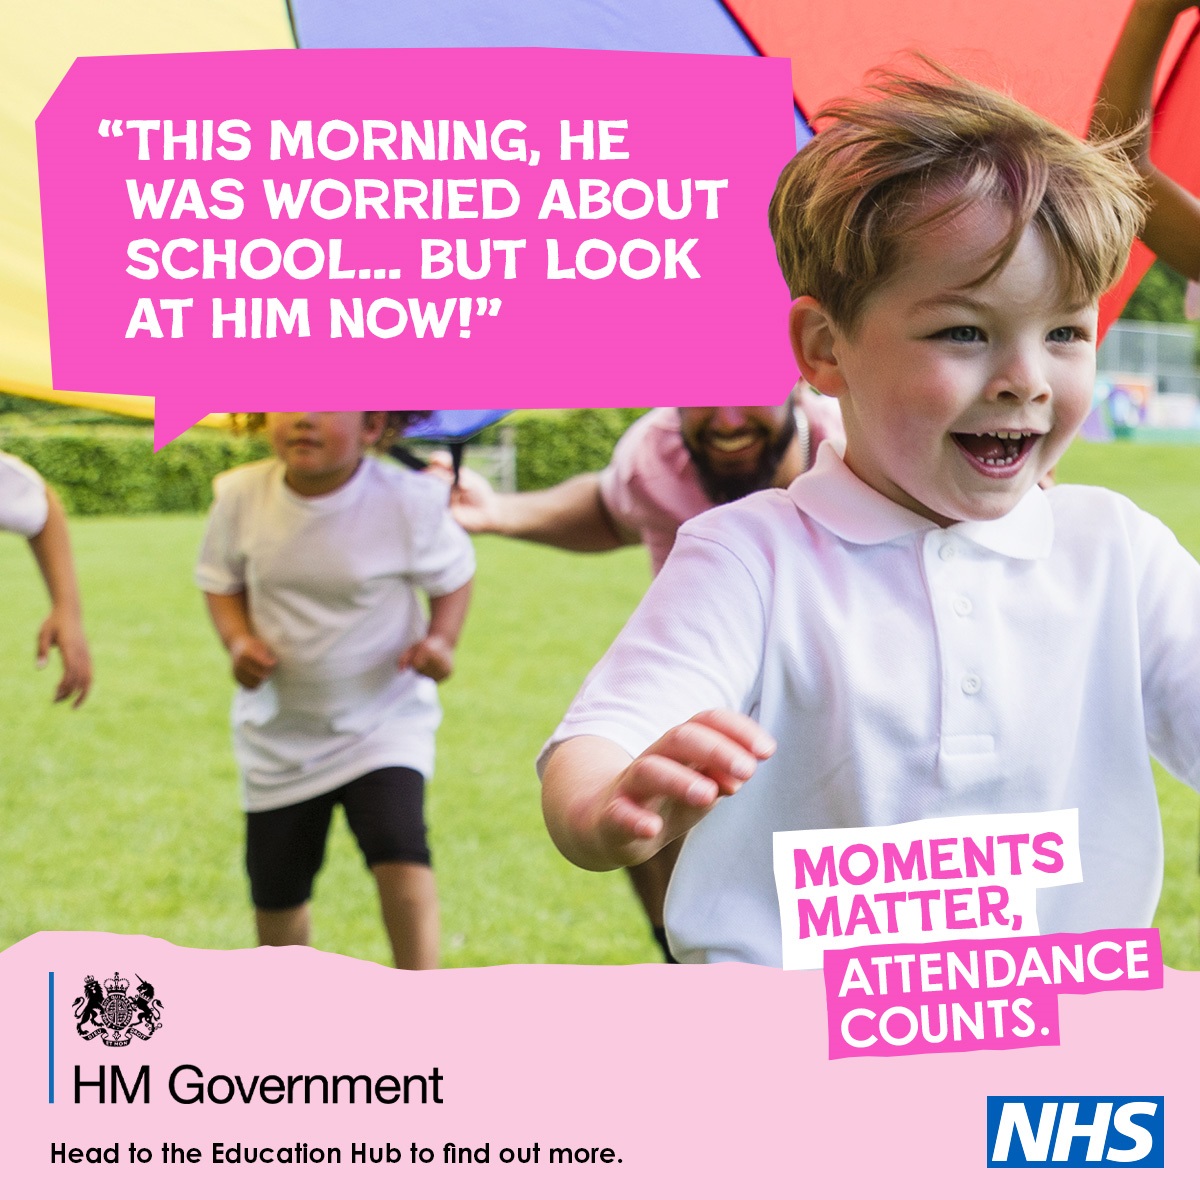 What a difference a school day makes. From the first day of term to the last, each moment, big or small, makes a big difference to a child’s wellbeing. We look forward to welcoming back our students on Monday! #momentsmatterattendancecounts @educationgovuk